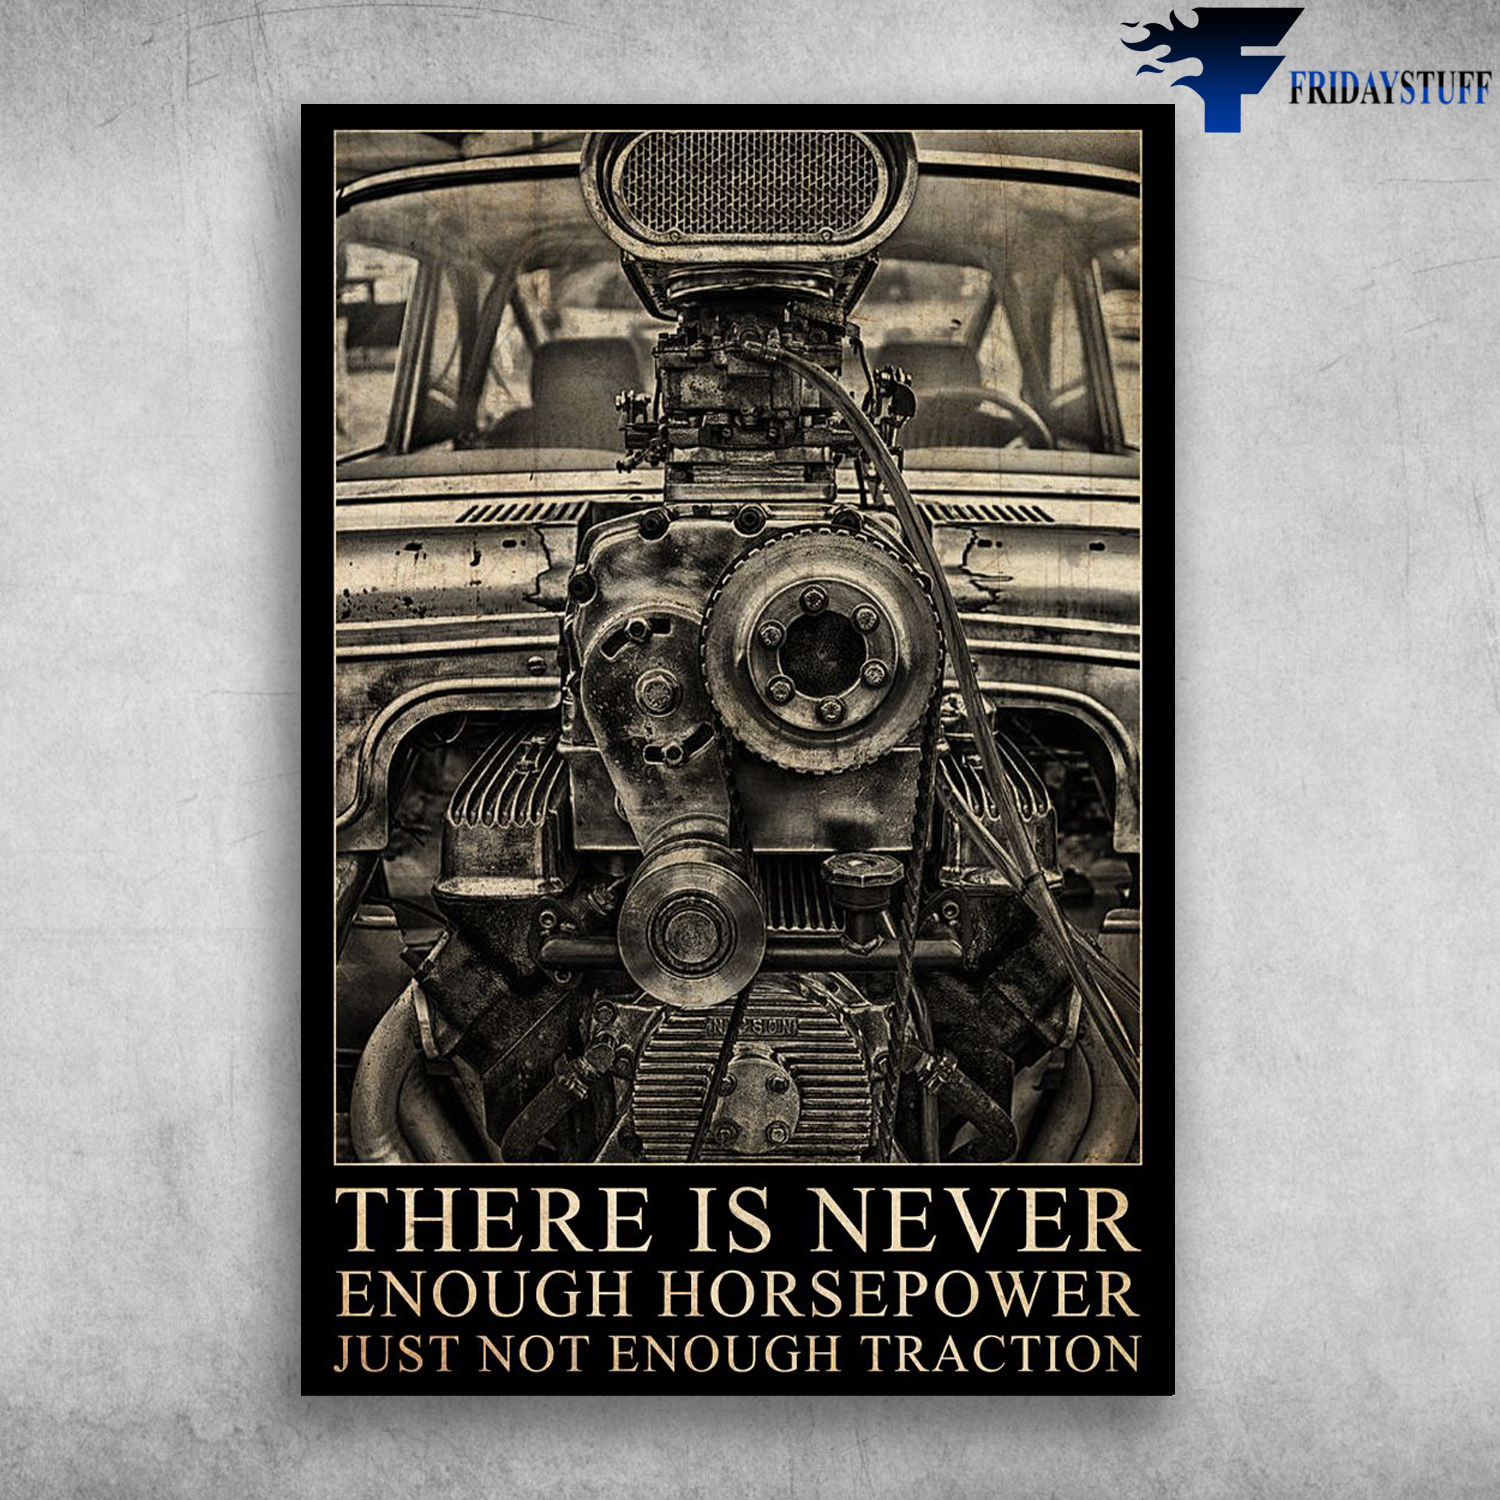 Hot Rod Engine - There Is Never Enough Horsepower, Just Not Enough Traction